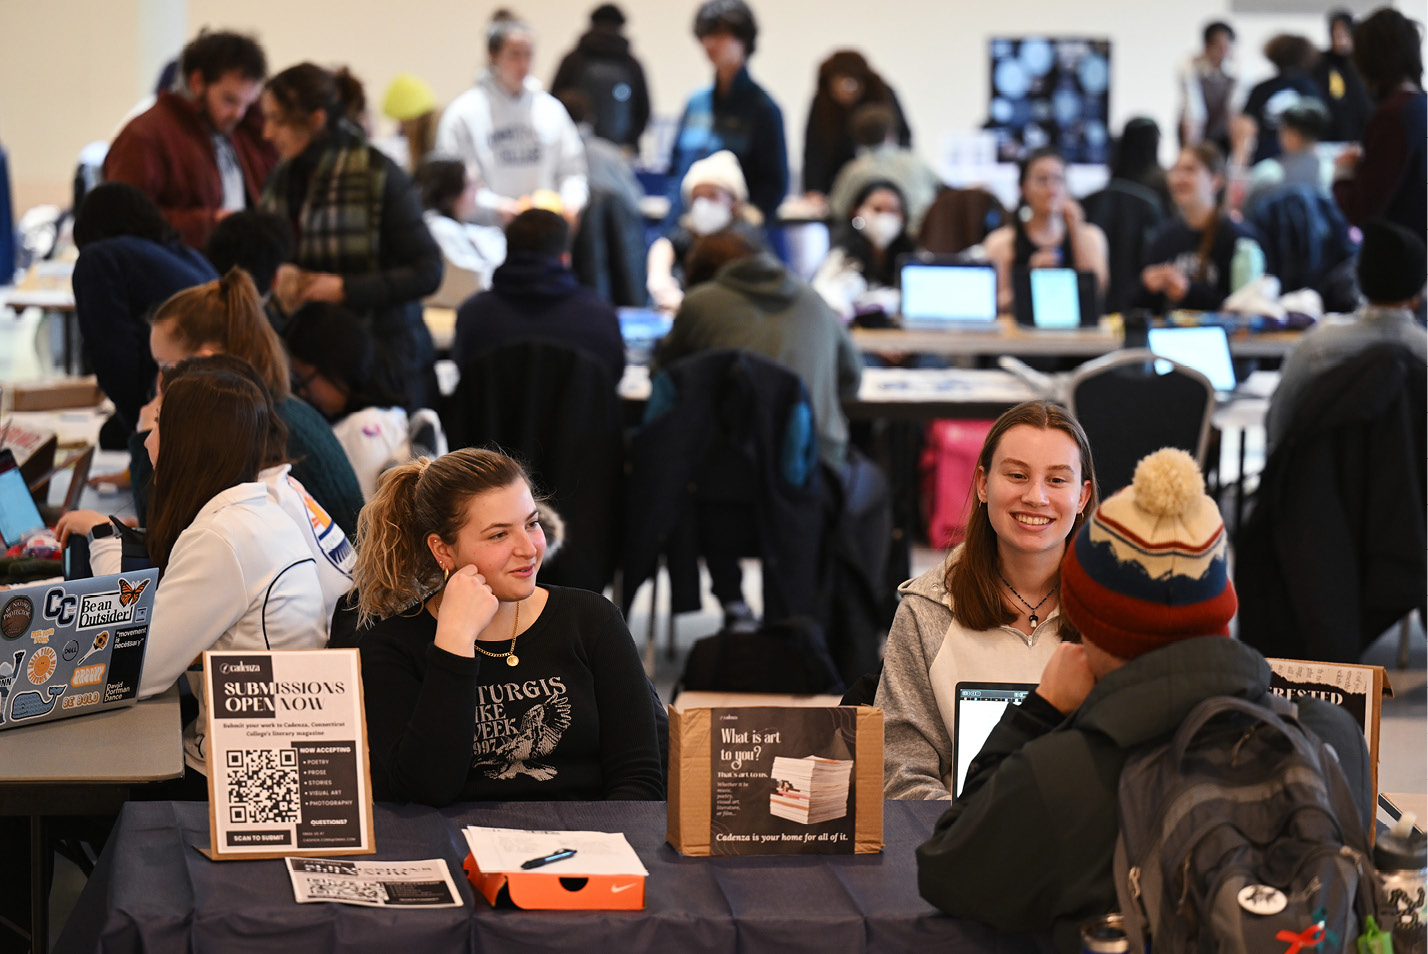 Dozens of student organizations put their best foot forward to display their offerings to the college community at the Spring Student Involvement Fair in early February.